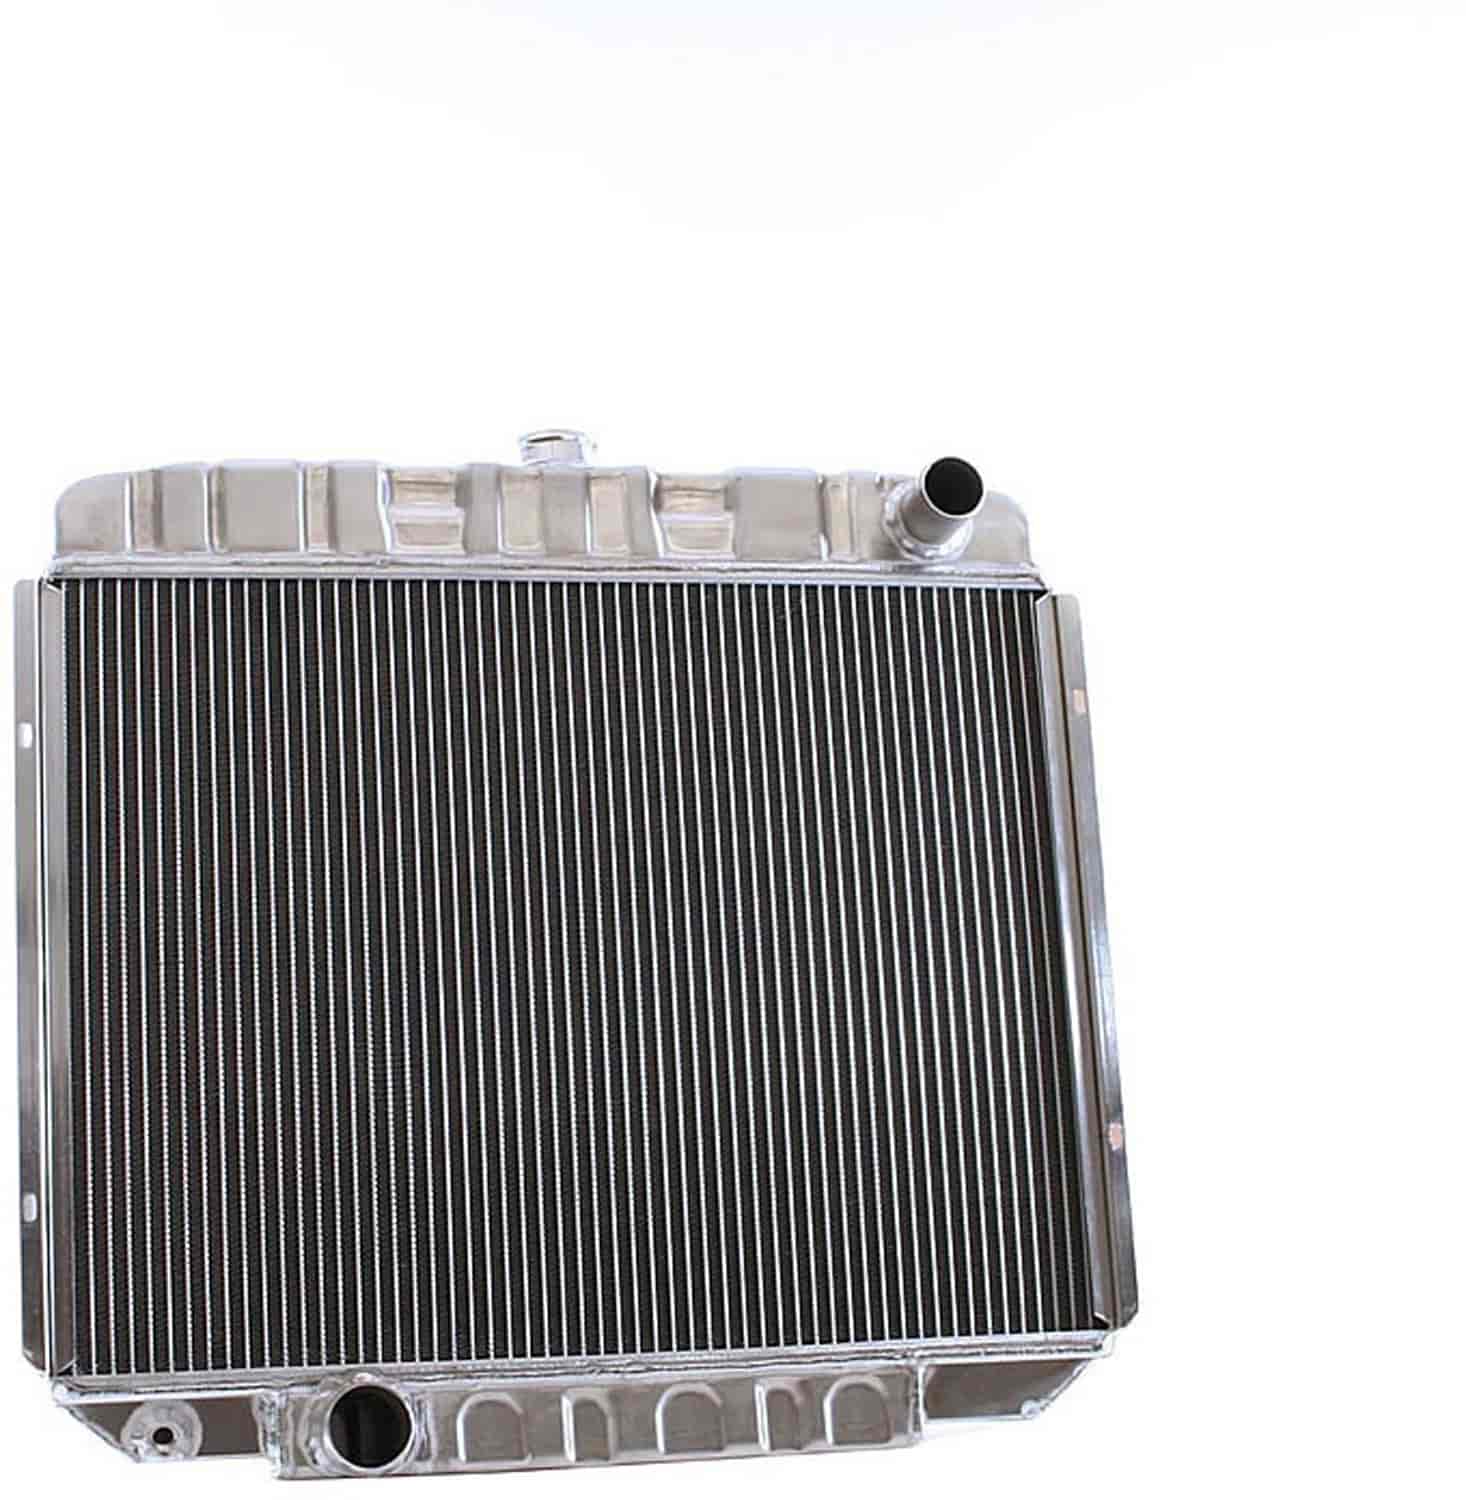 ExactFit Radiator for 1967 Fairlane with Late Small